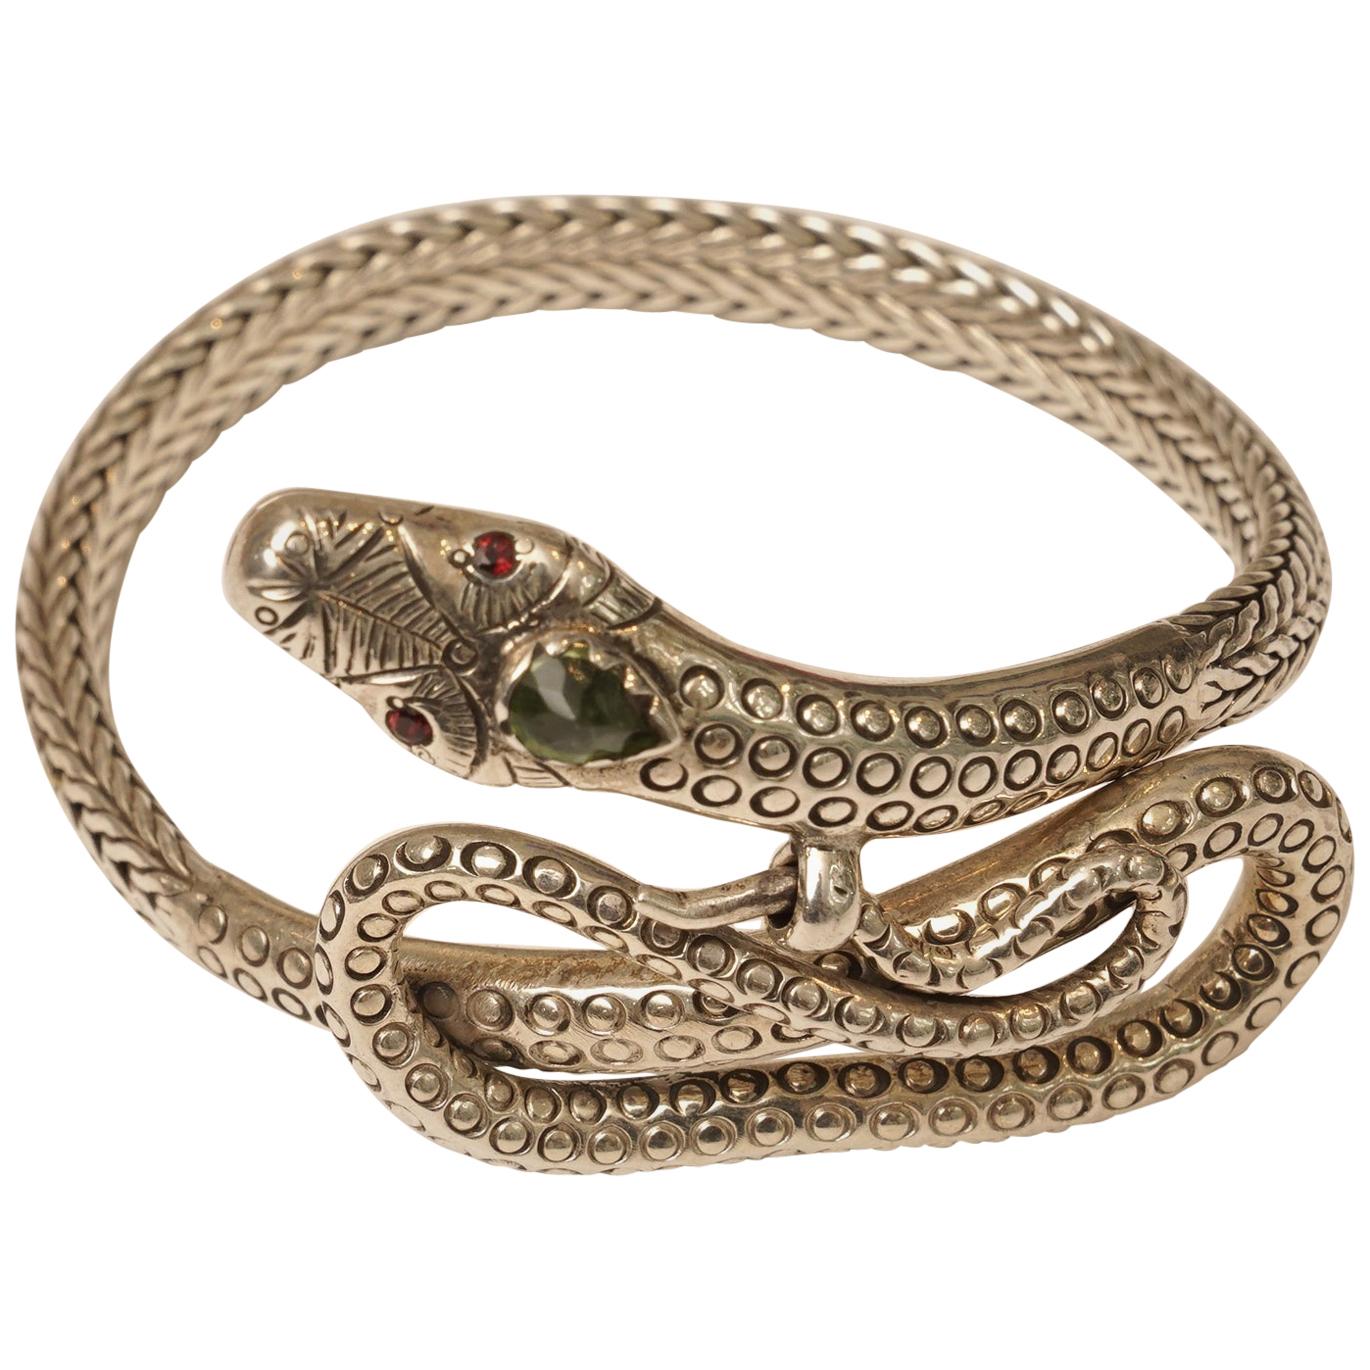 Sterling Silver Coiled Snake Bracelet with Peridot